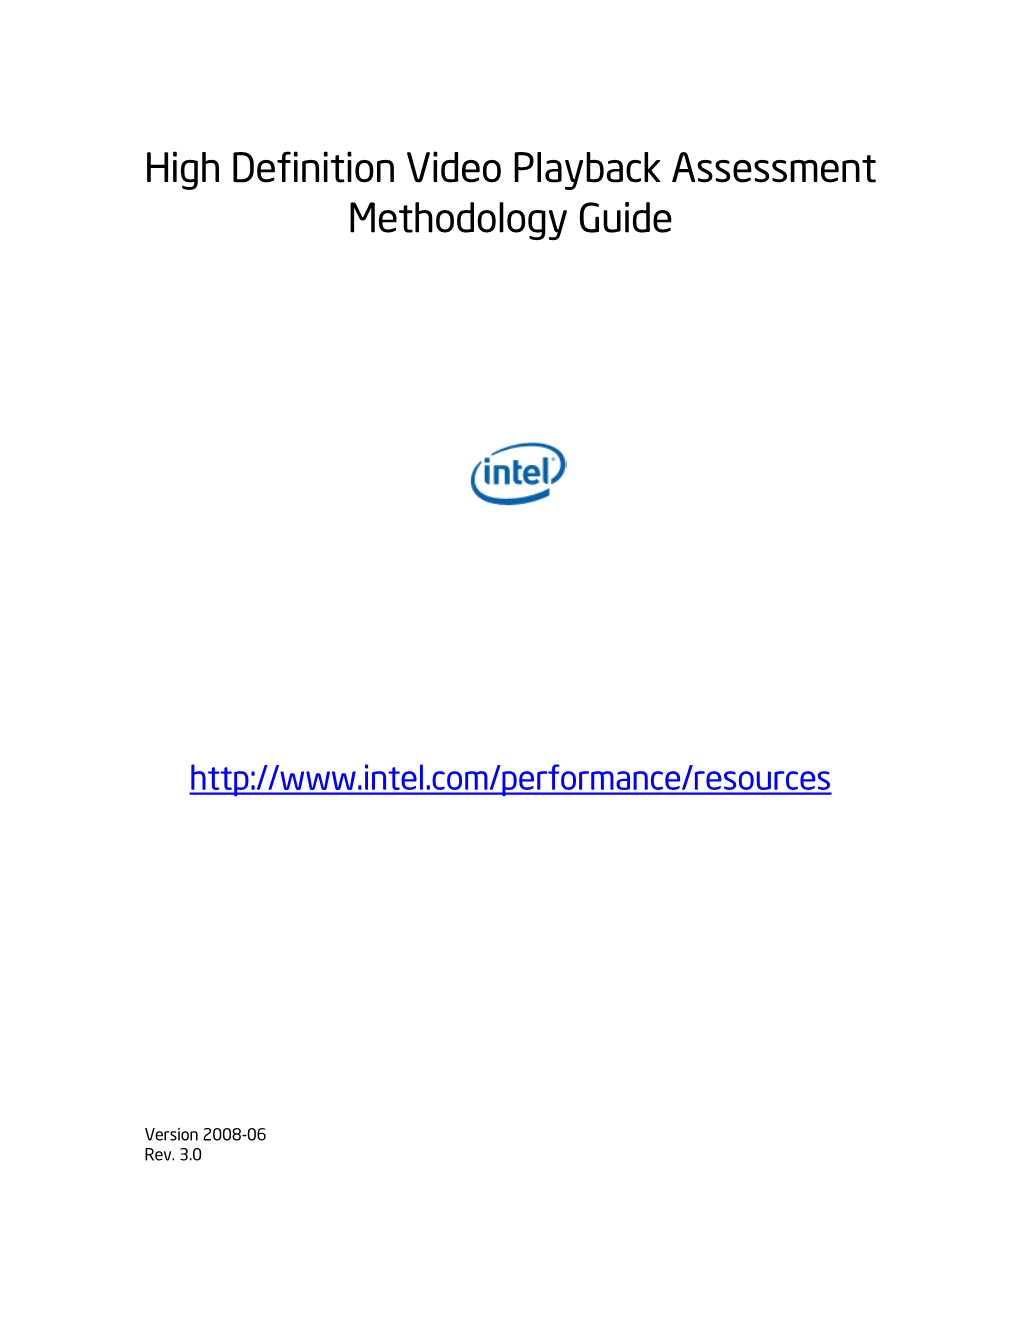 High Definition Video Playback Assessment Methodology Guide